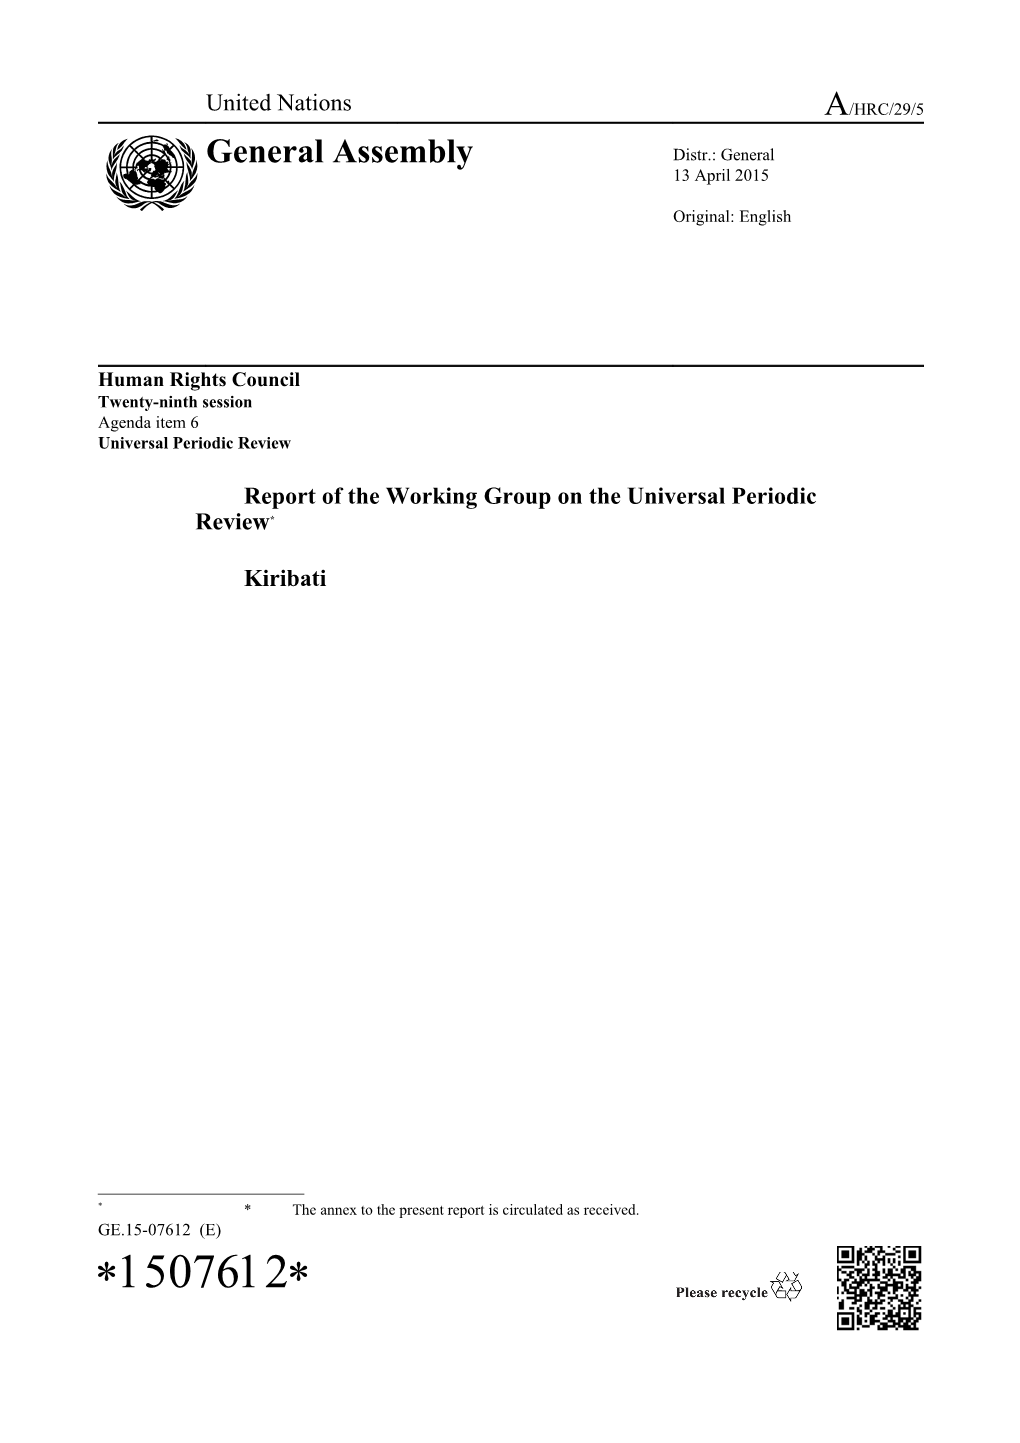 Report of the Working Group on the Universal Periodic Review Kiribati in English